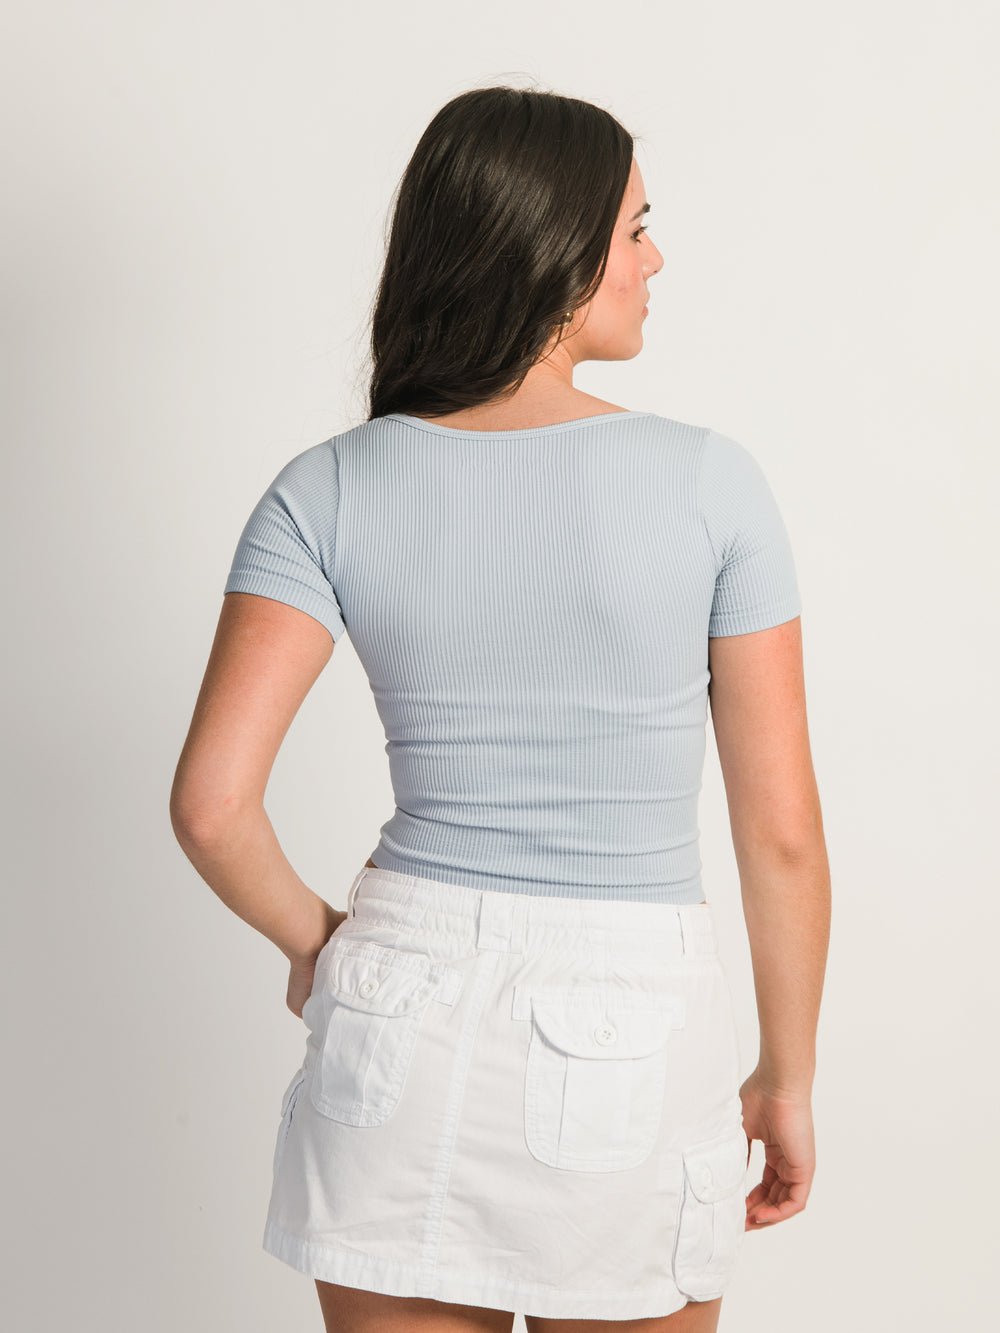 HARLOW SQUARE NECK SEAMLESS TEE - BABY BLUE